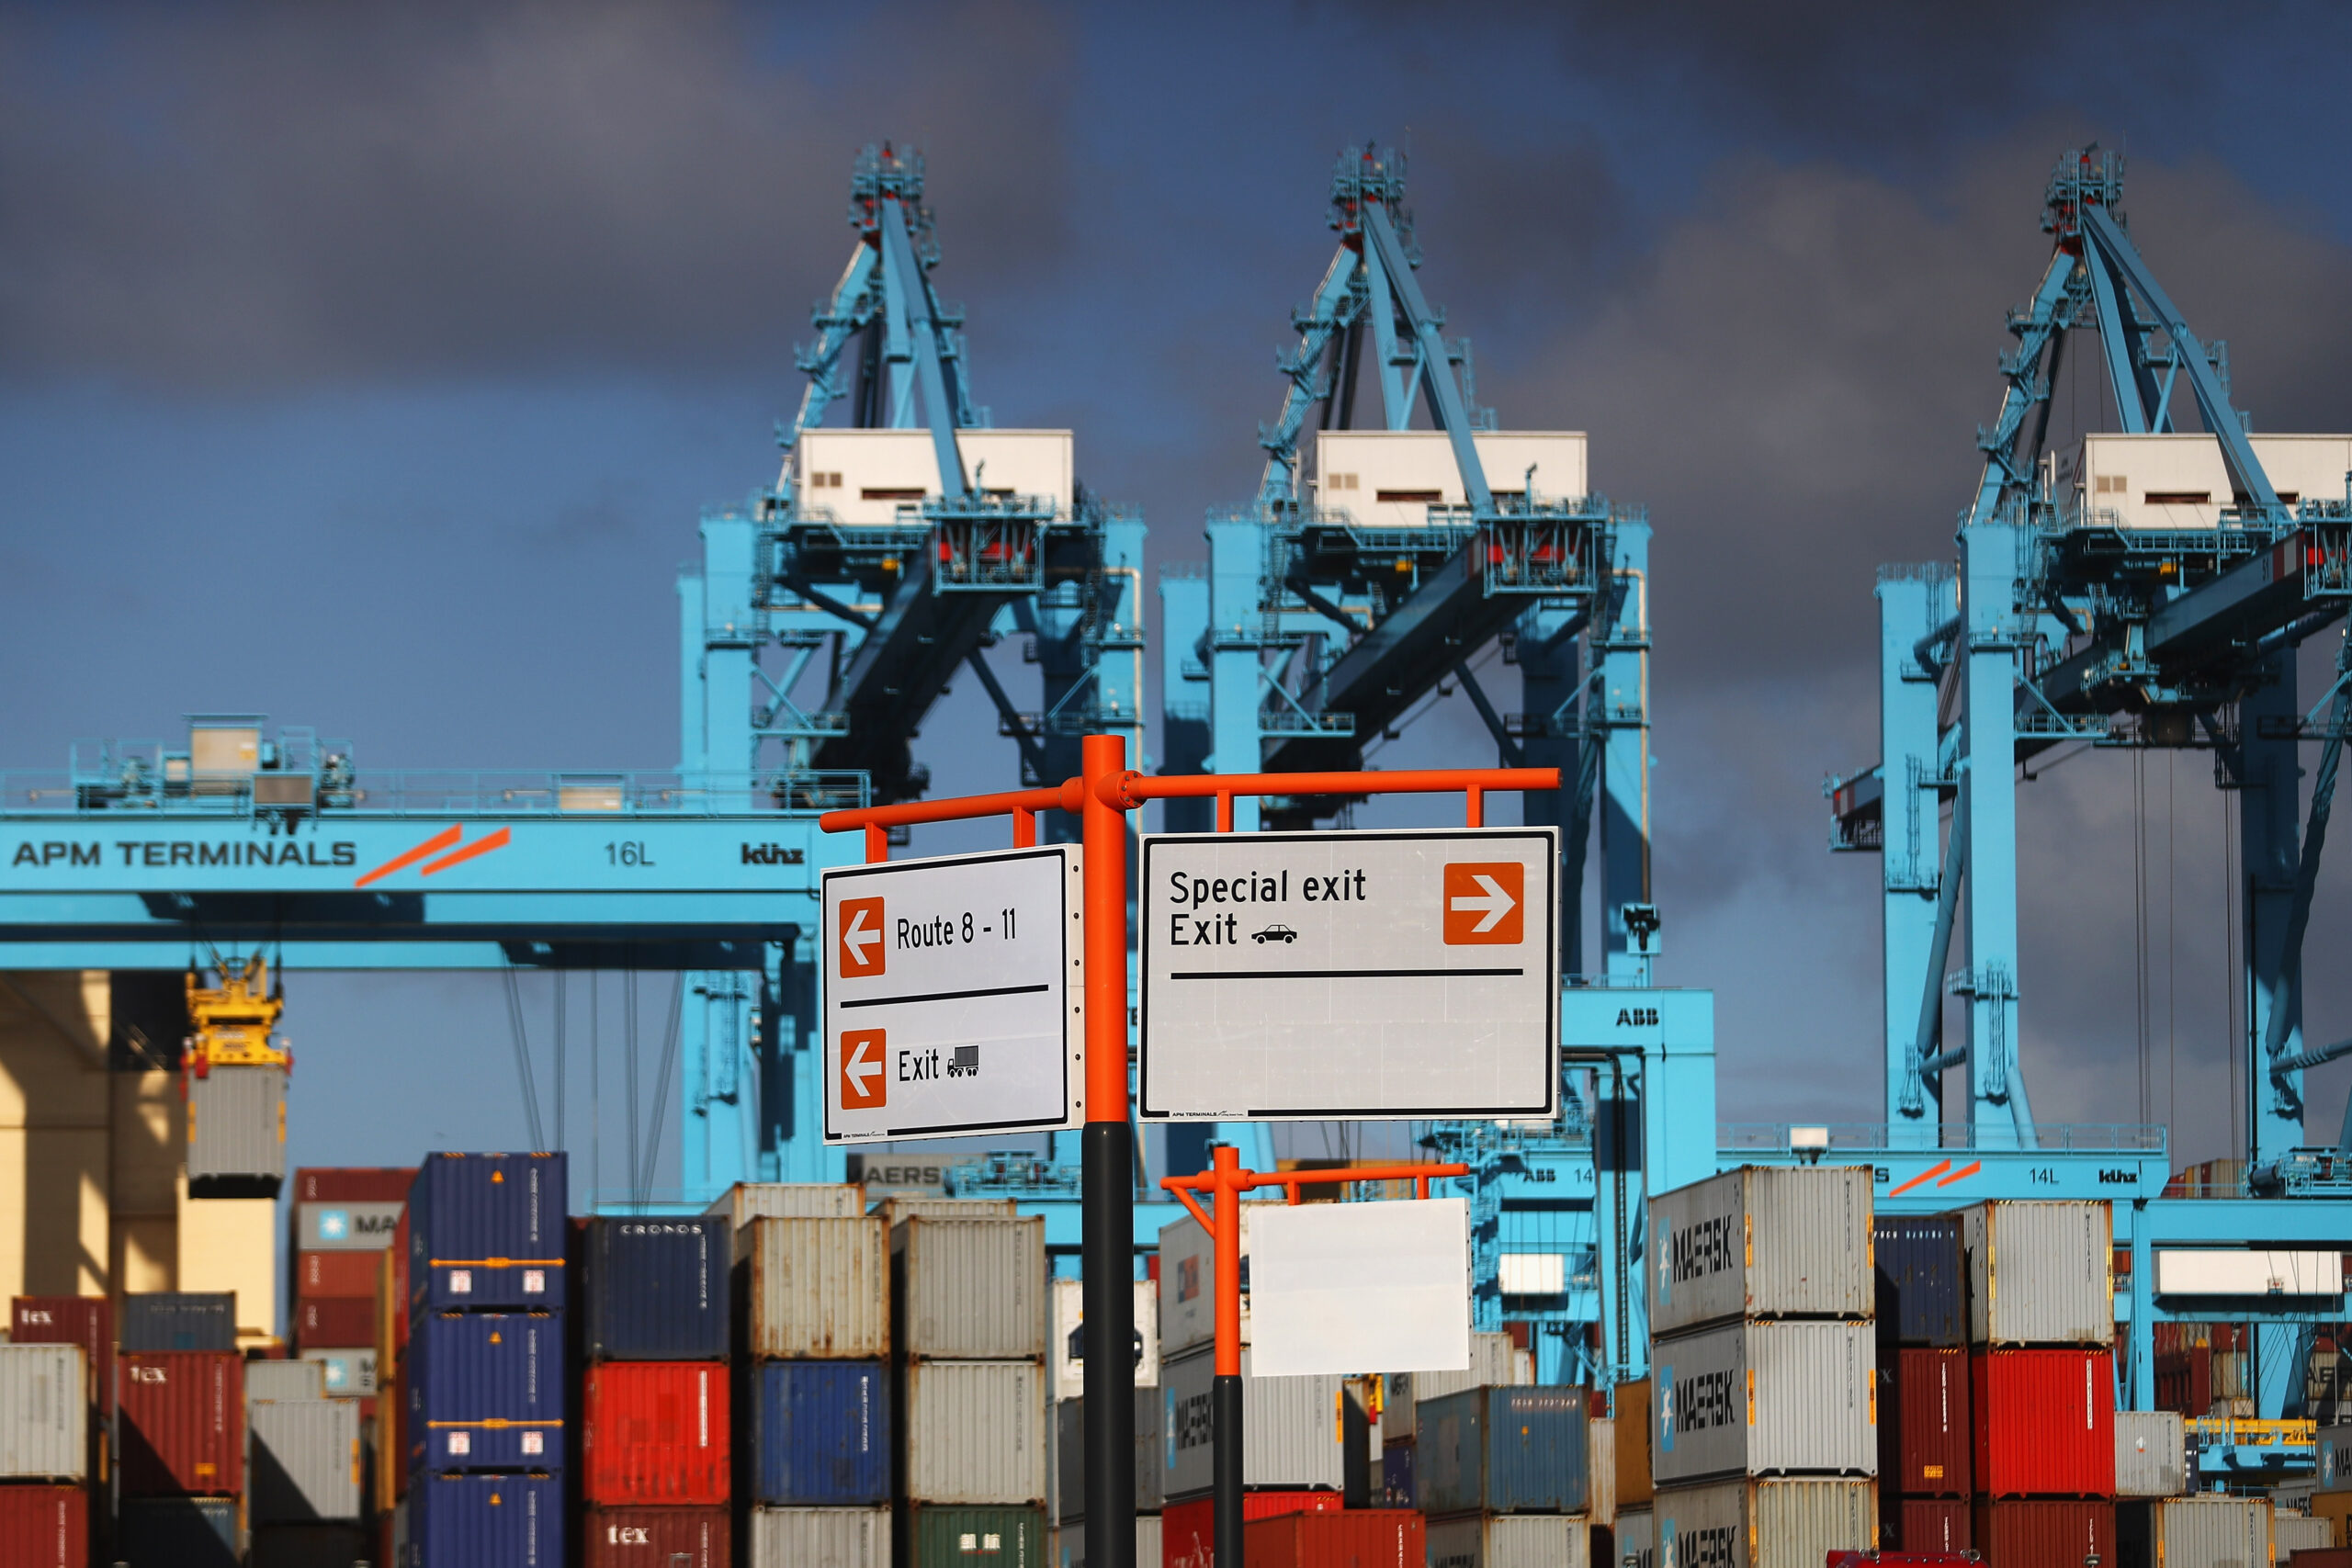 General view of Rotterdam Port that includes multi-colored shipping containers and blue cranes. Two signs hang off orange boles indicating directions.